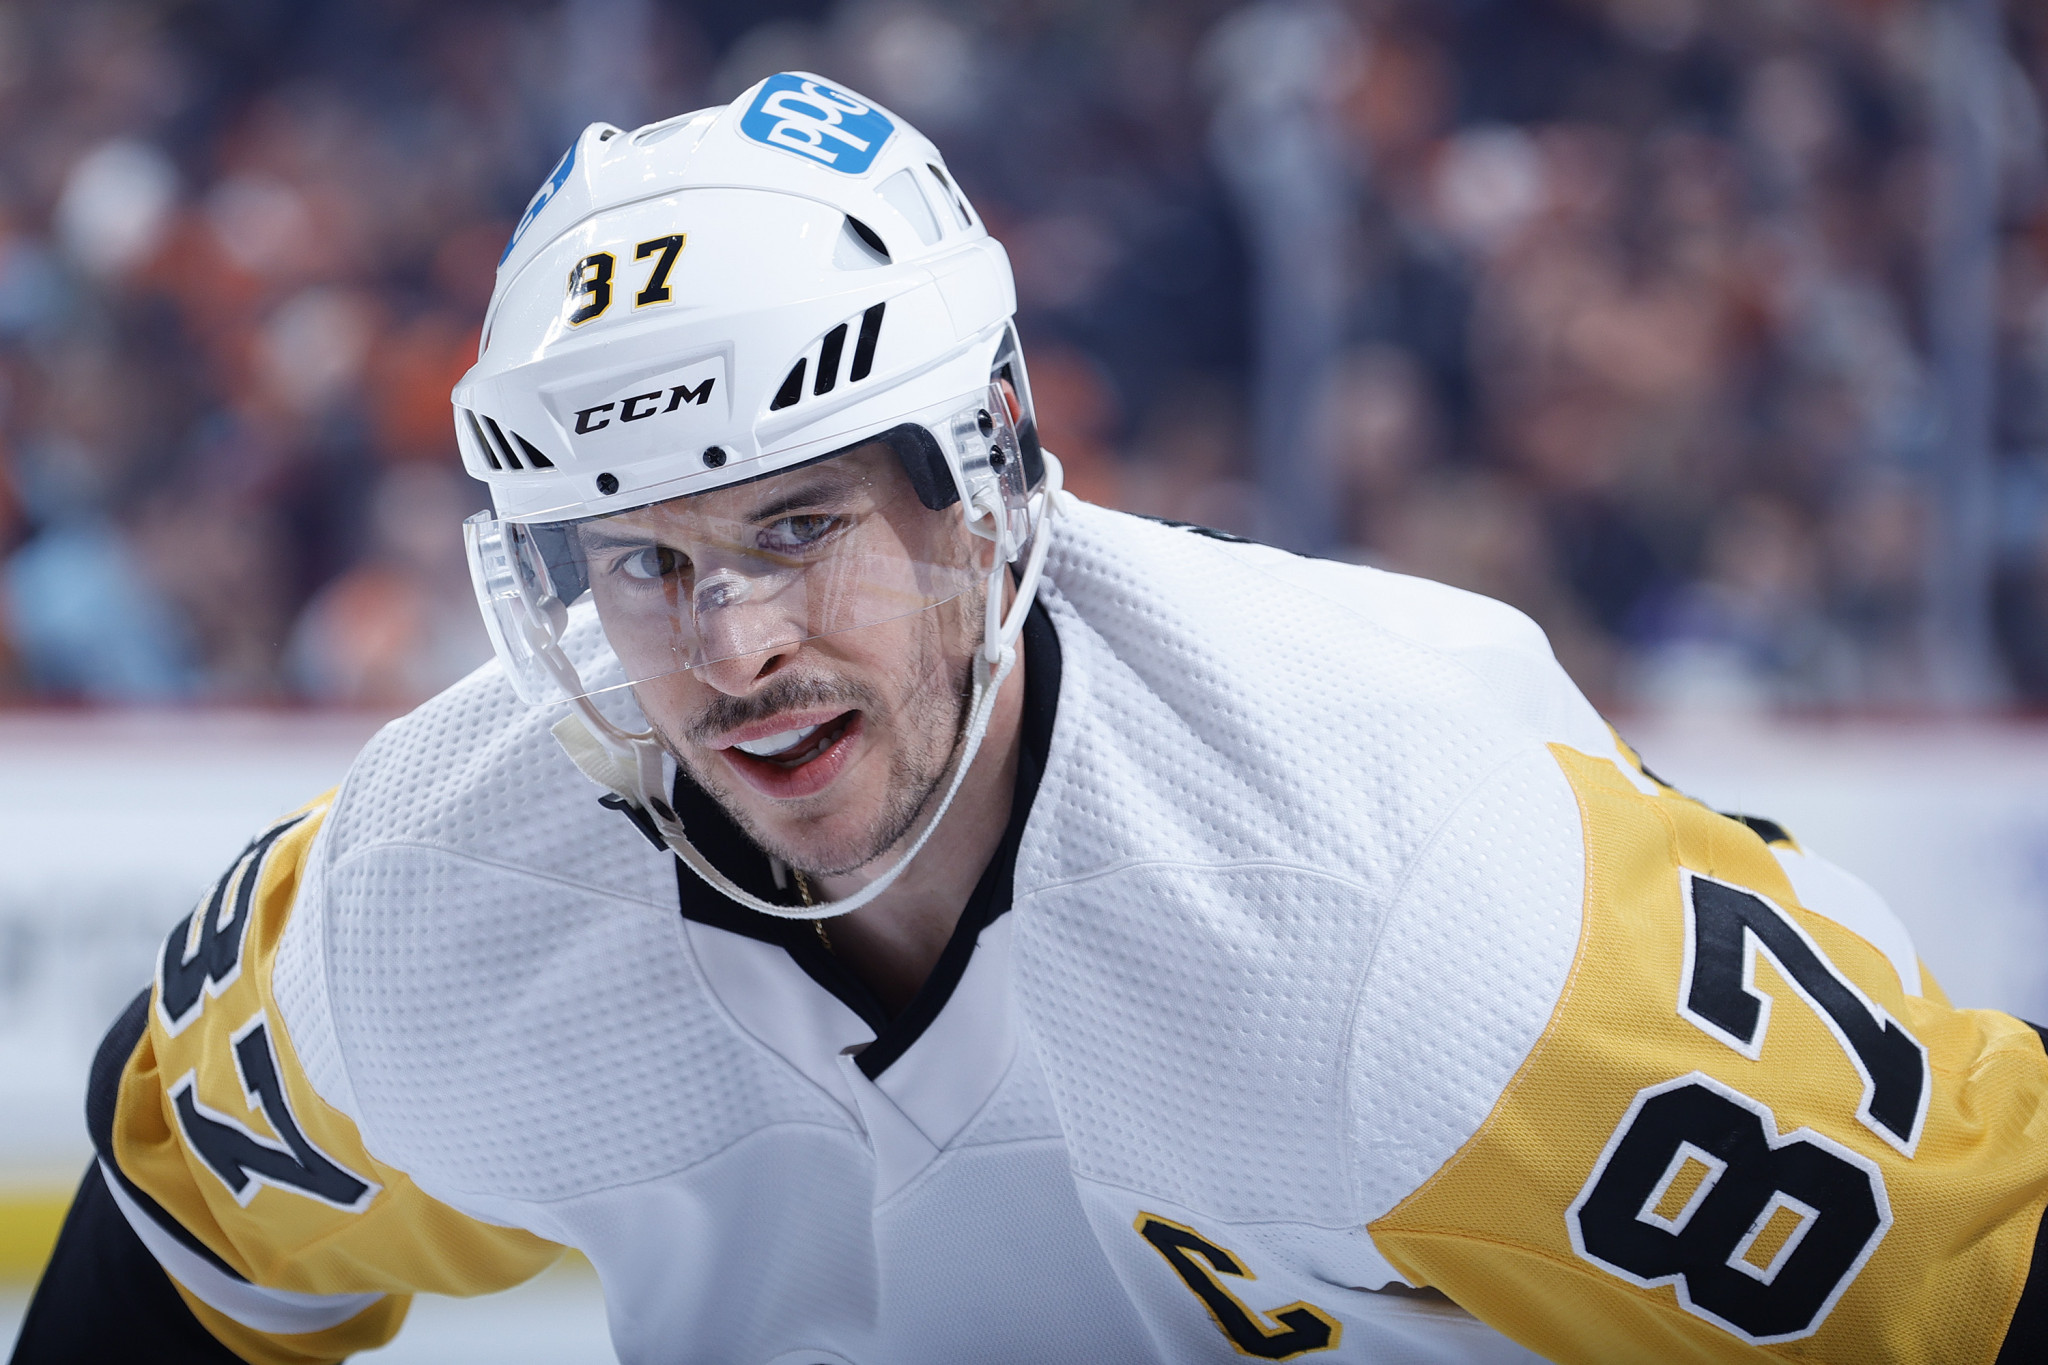 Sidney Crosby was one of the Canadians initially selected for Beijing 2022 ©Getty Images